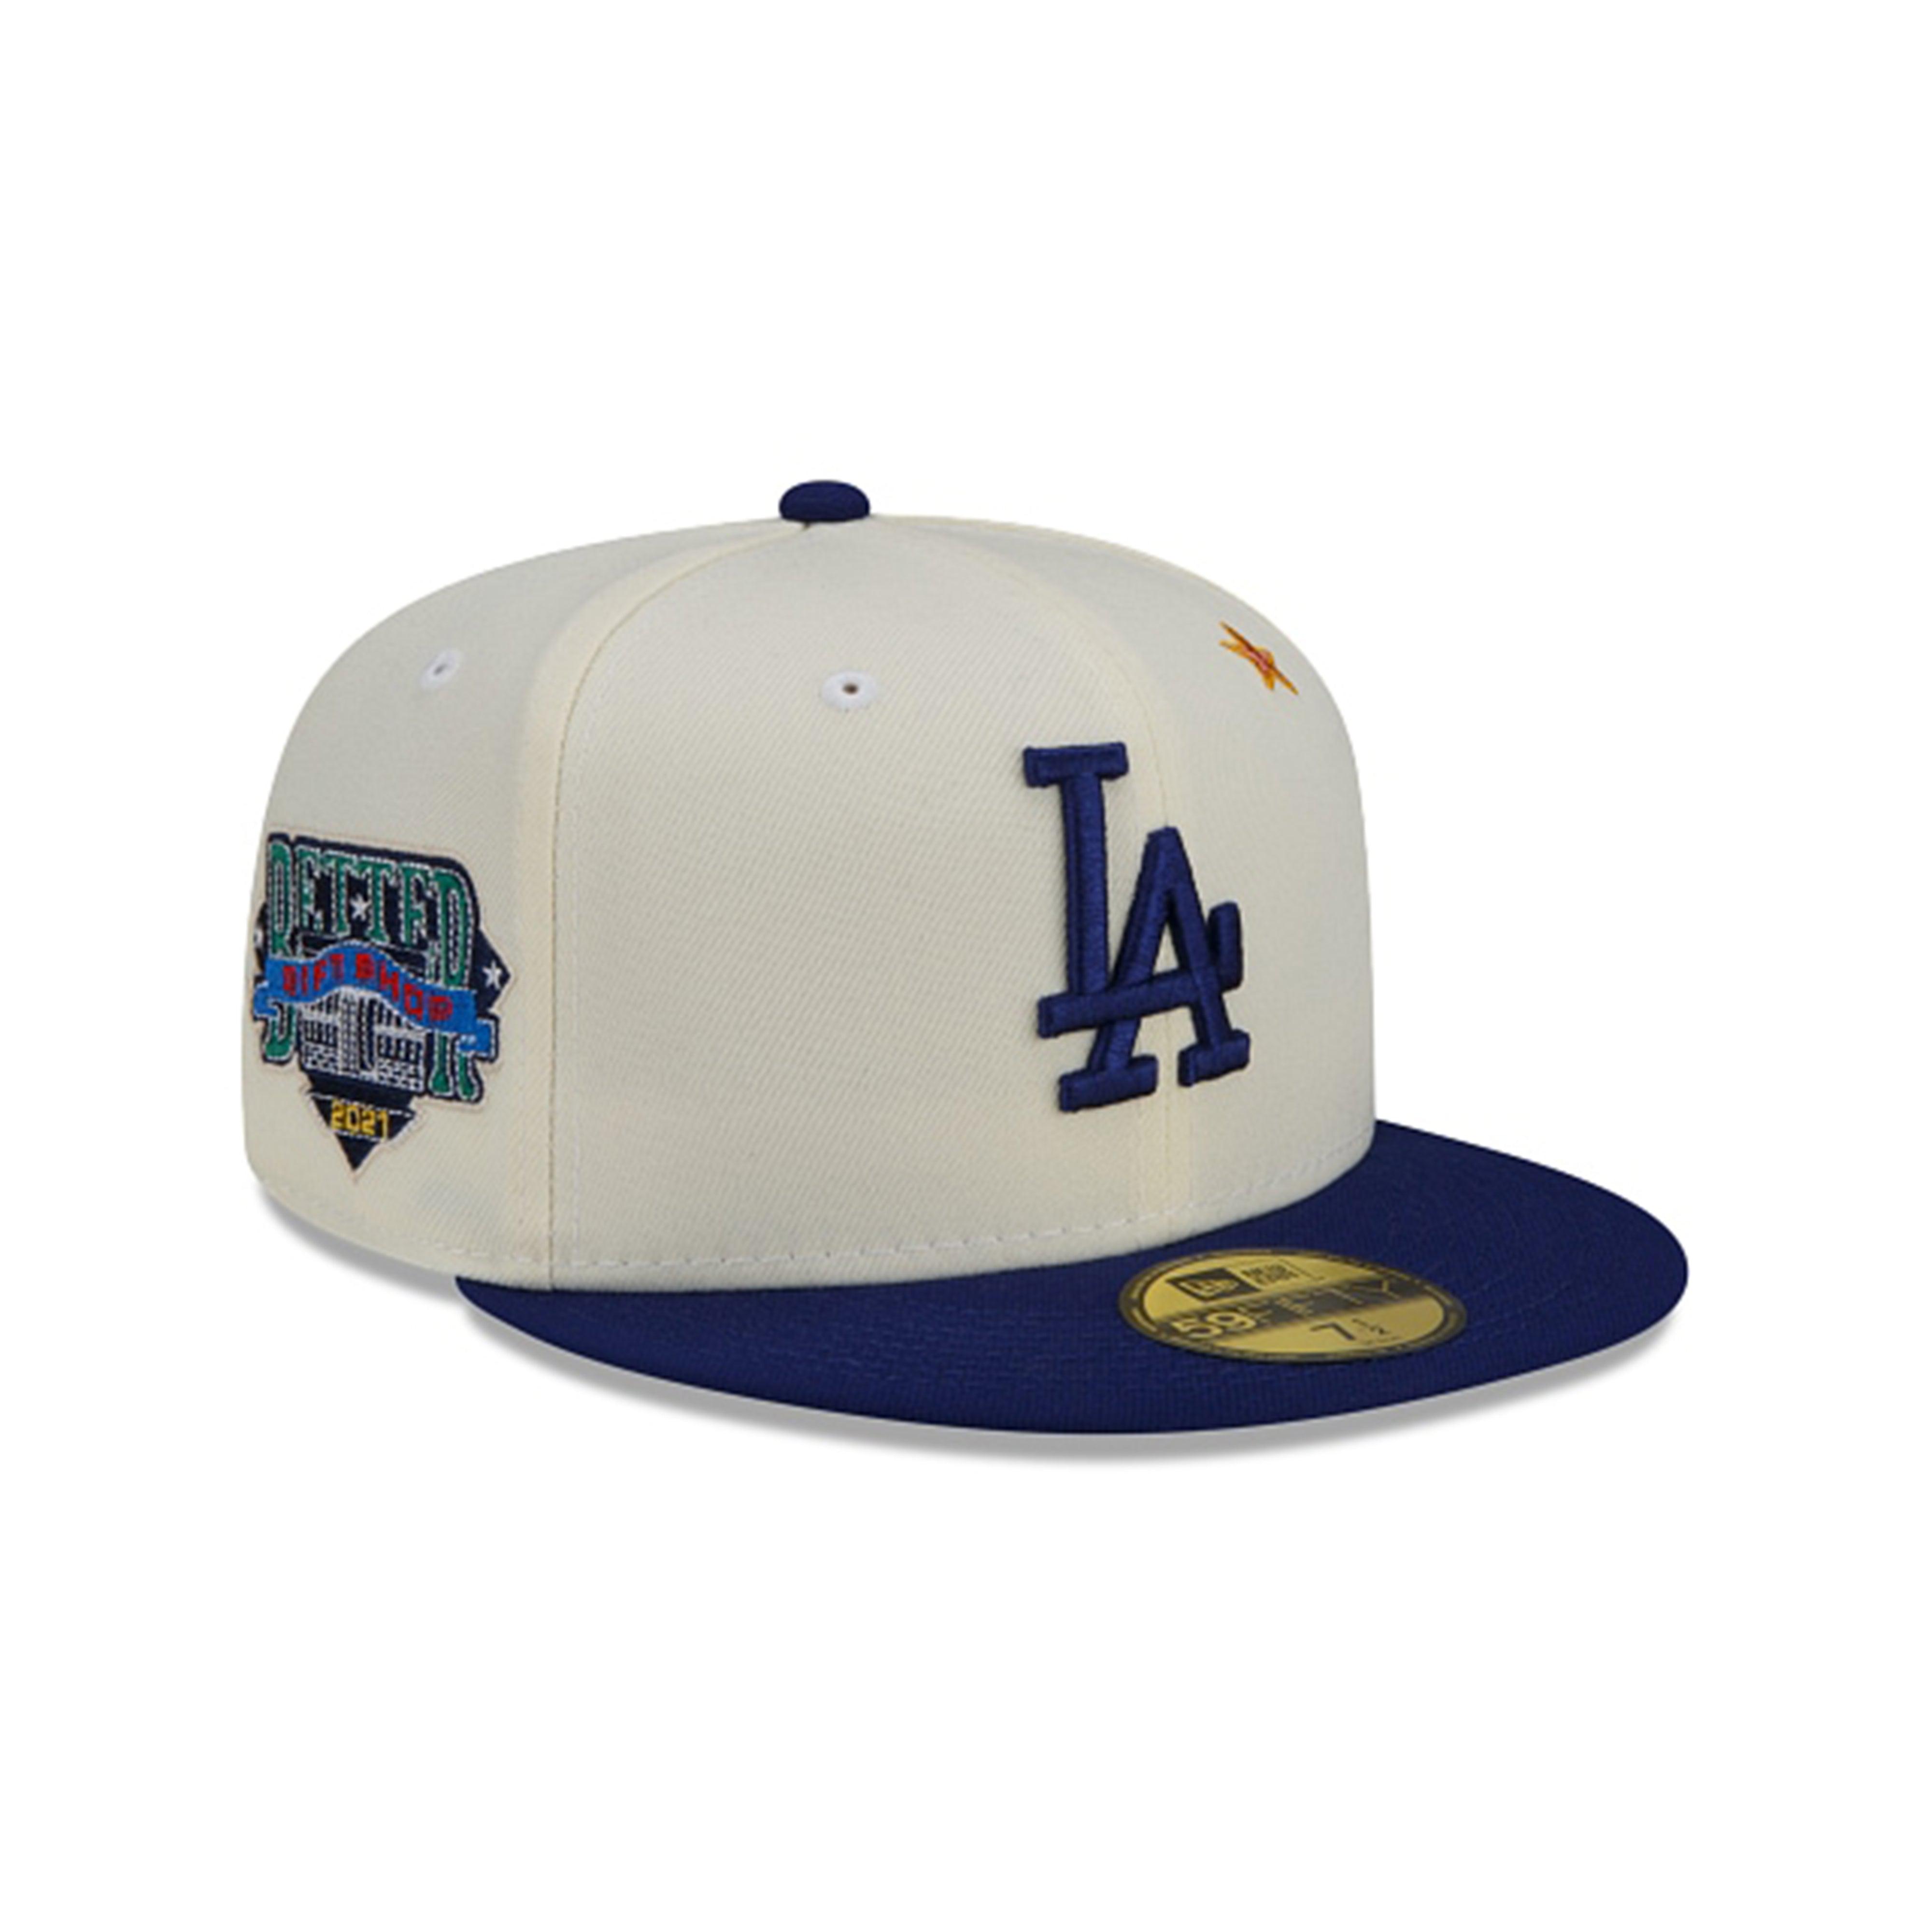 Better™ Gift Shop x MLB - "Dodgers"  New Era Fitted (Cream) by BETTER